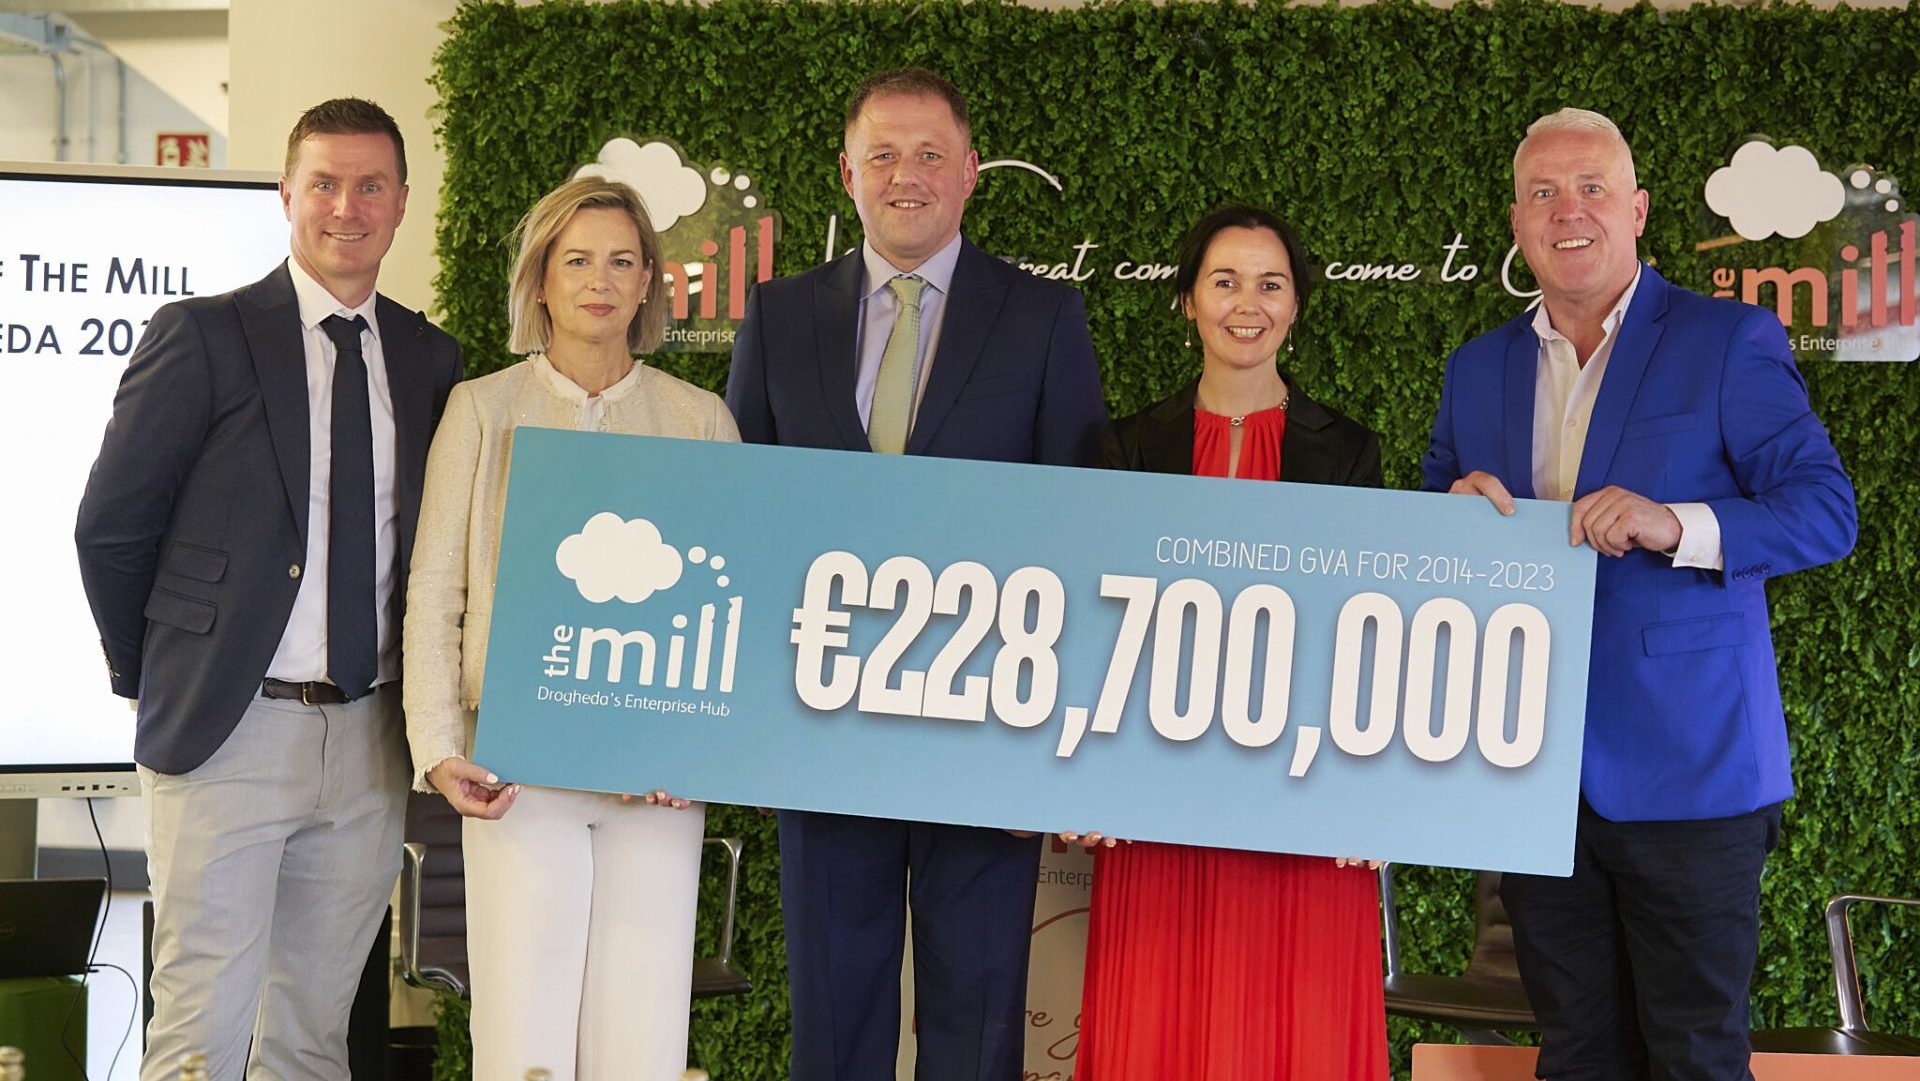 THE MILL ENTERPISE HUB UNVEILS €229M ECONOMIC IMPACT FINDING AS PART OF ITS 10TH BIRTHDAY CELEBRATIONS